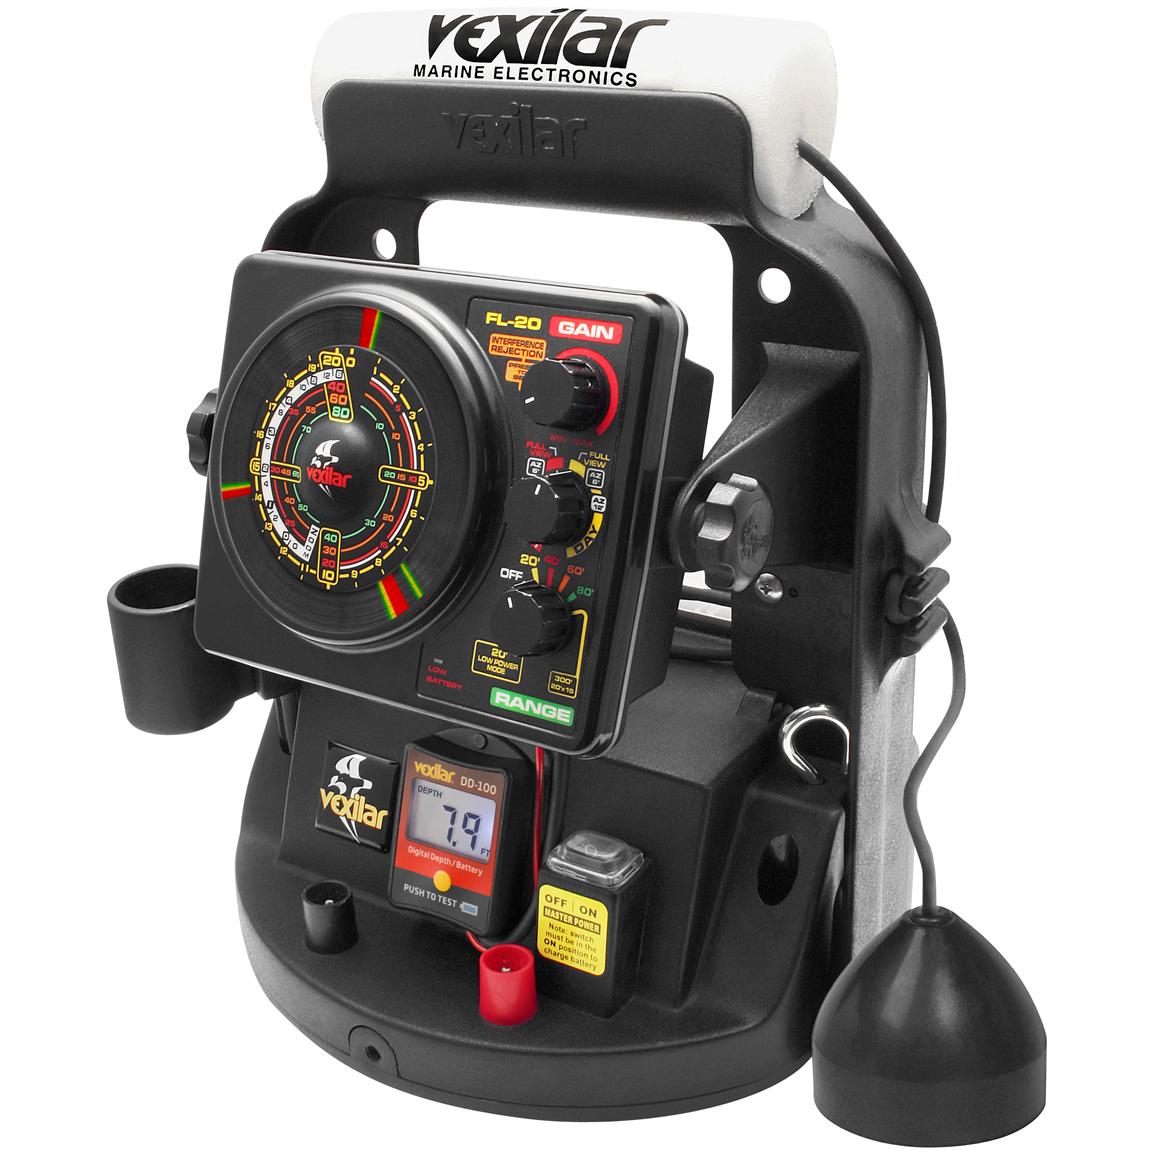 Vexilar FL20 Flasher Fishfinder Ultra Pack with 9 Degree